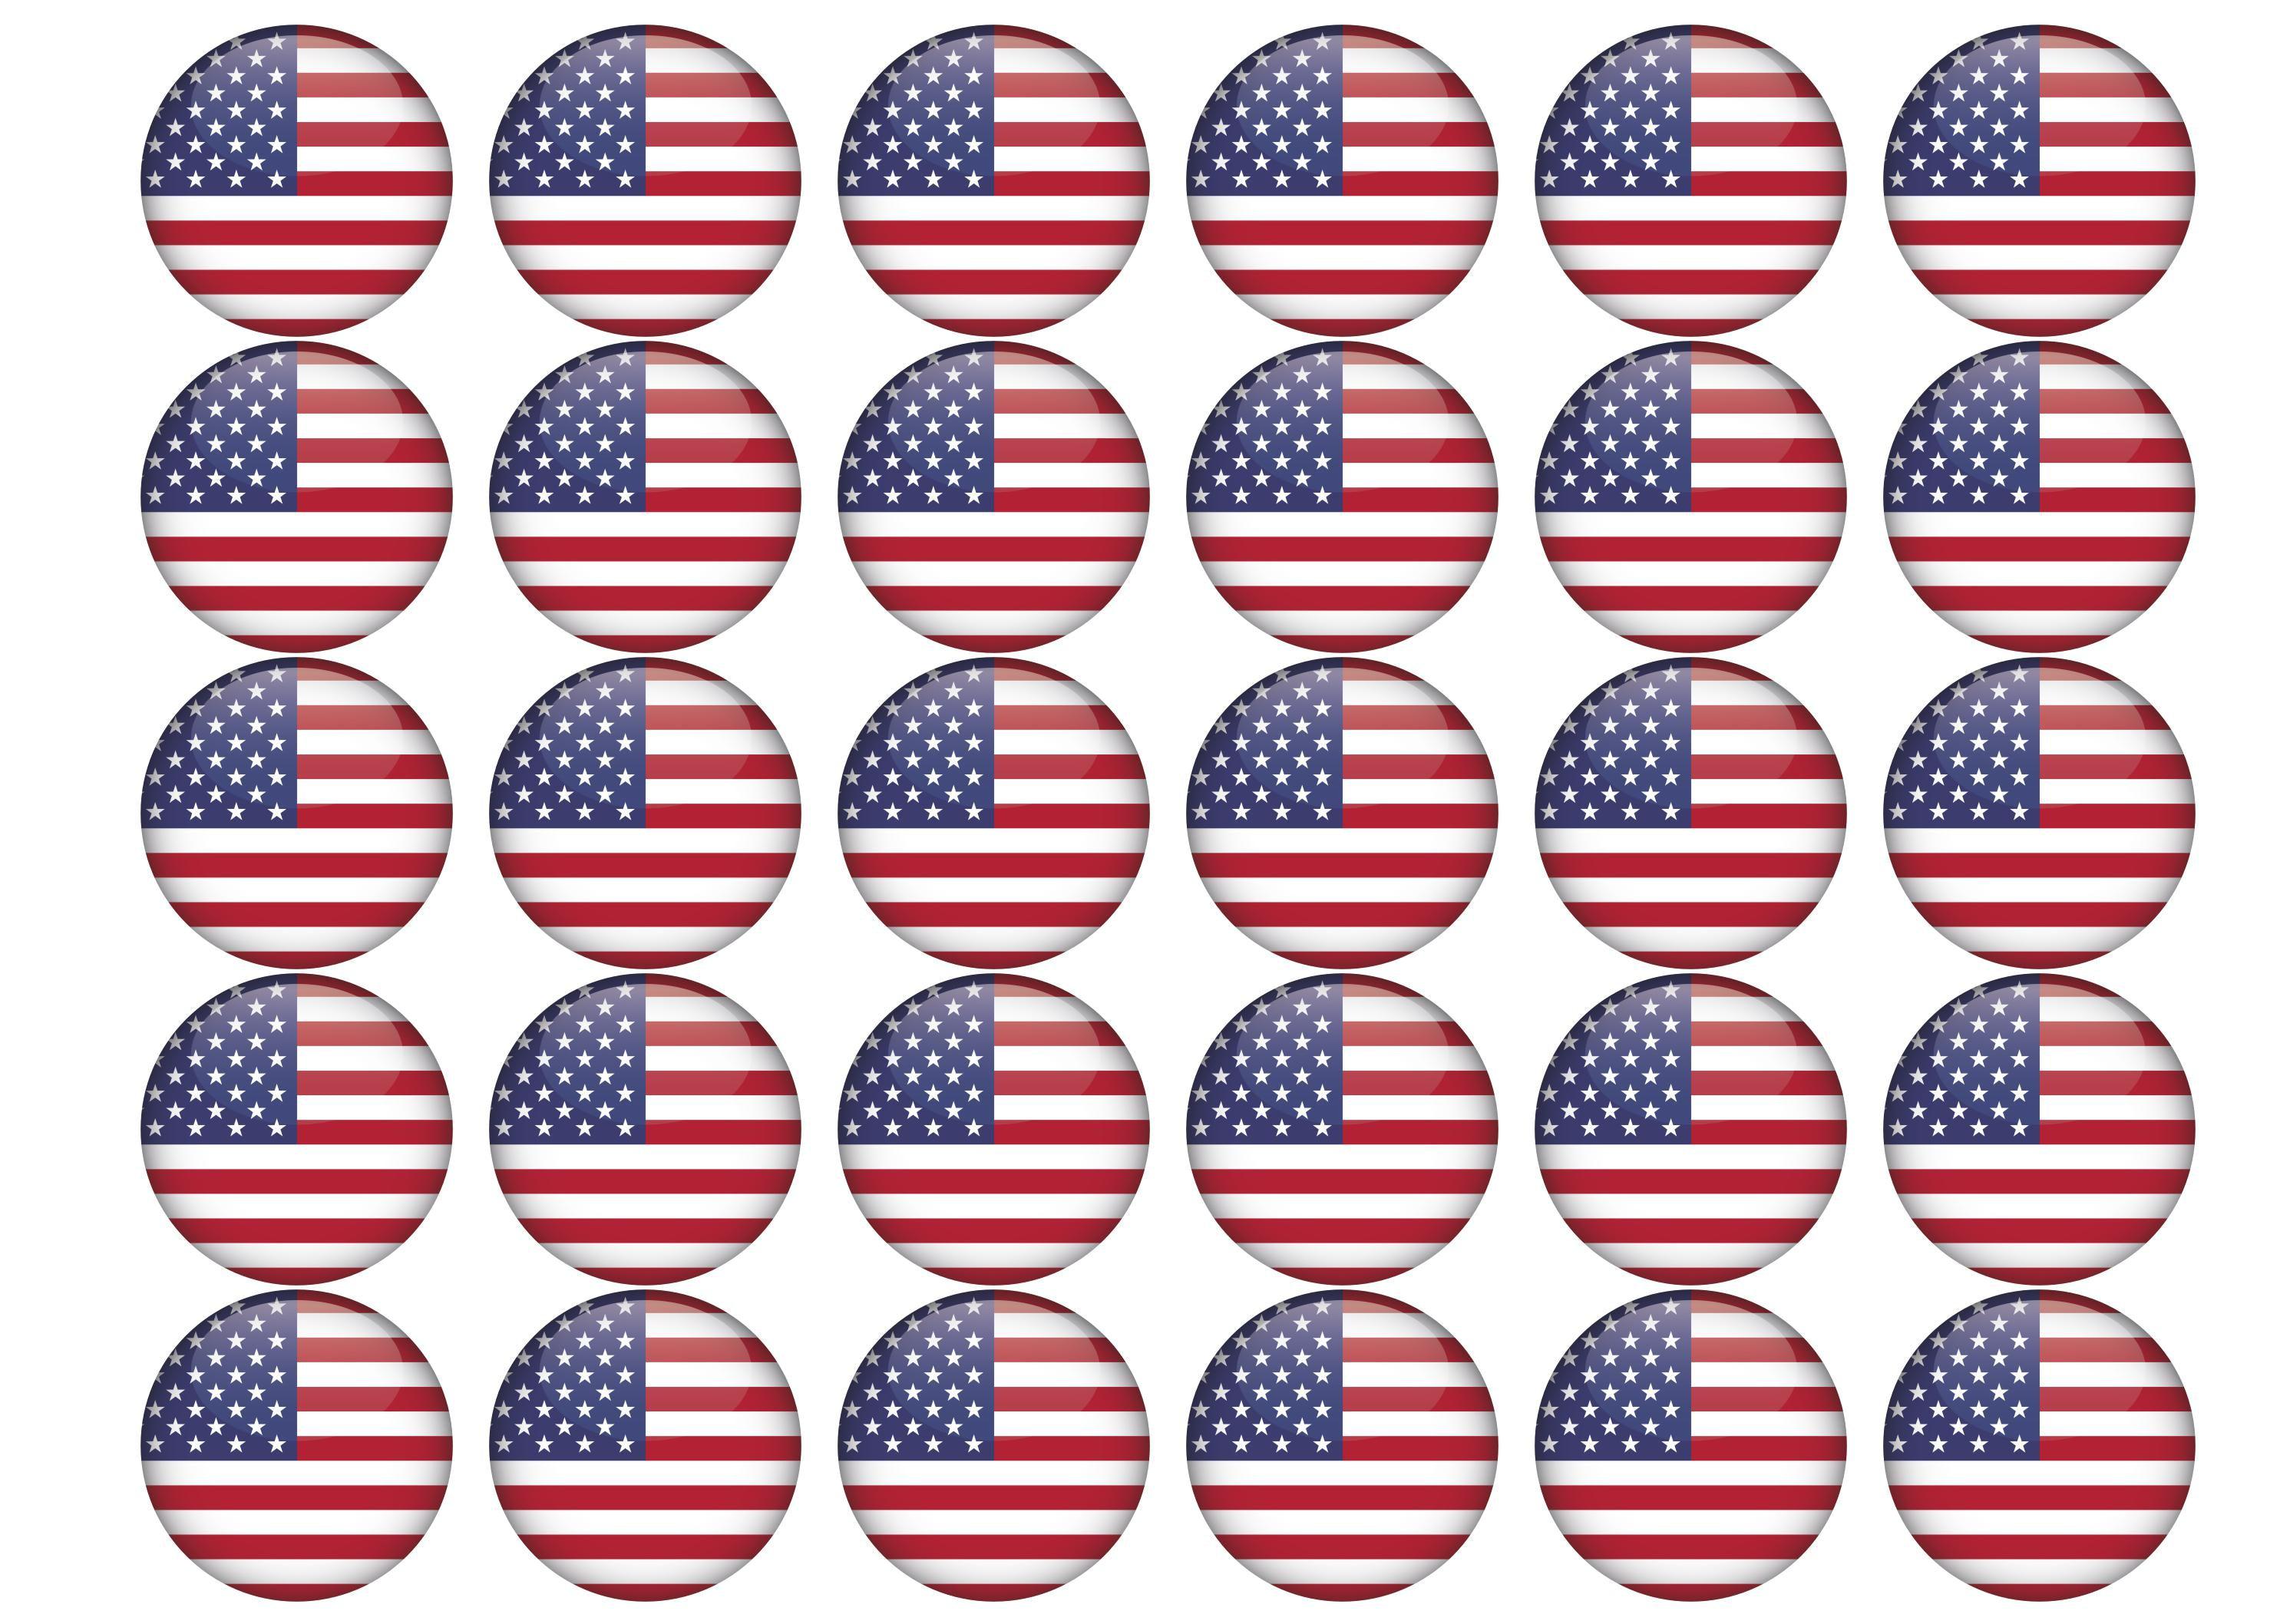 30 edible toppers with the USA Flag